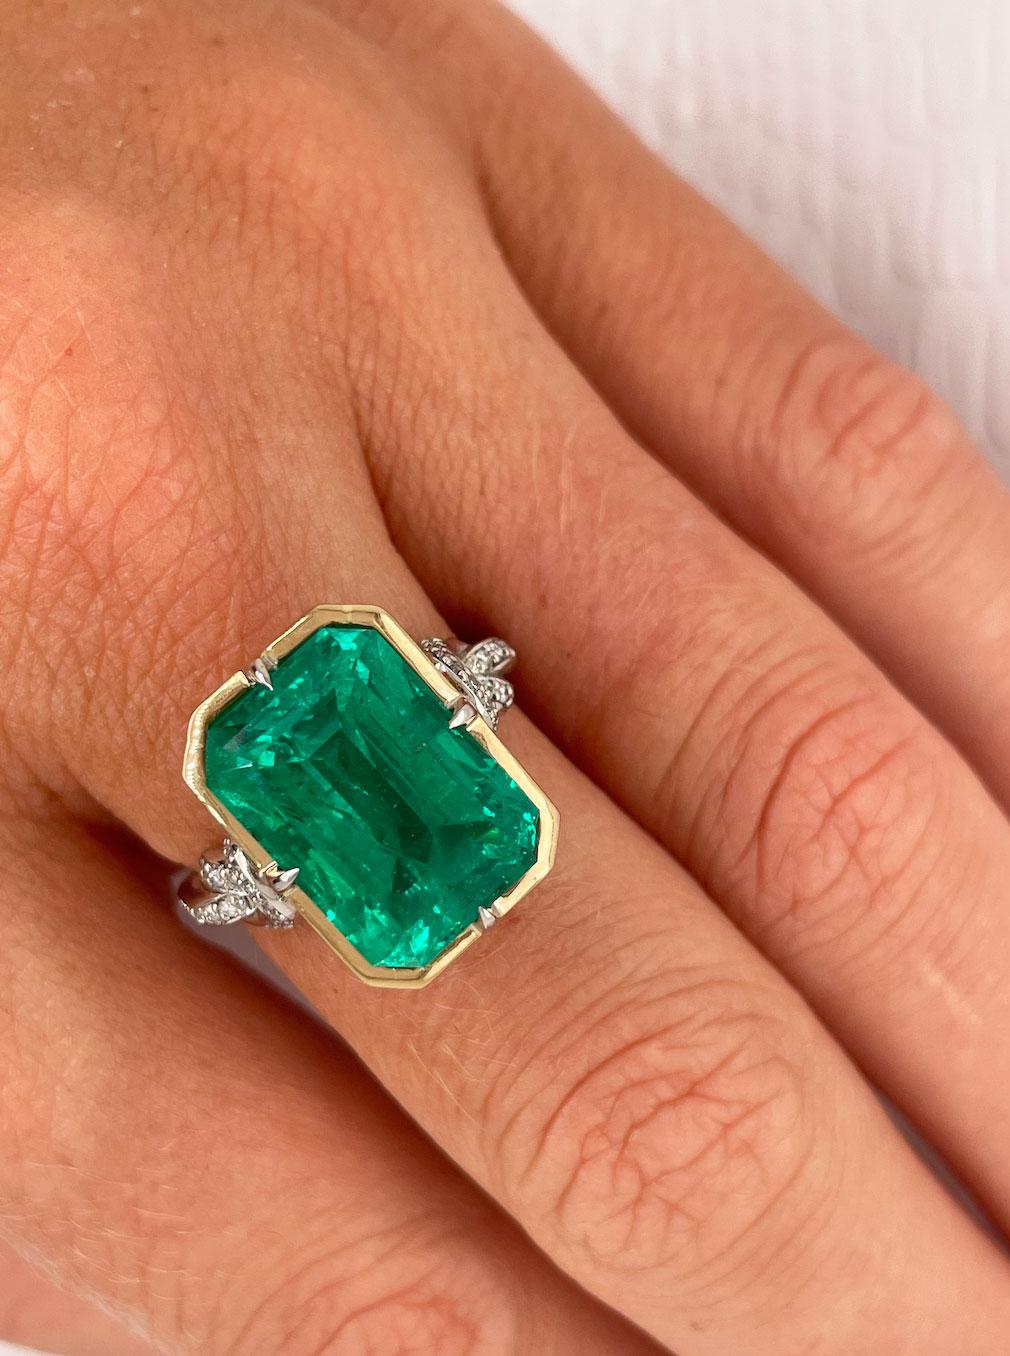 5.79ct Zambian Emerald in Forget Me Knot Style Ring 3